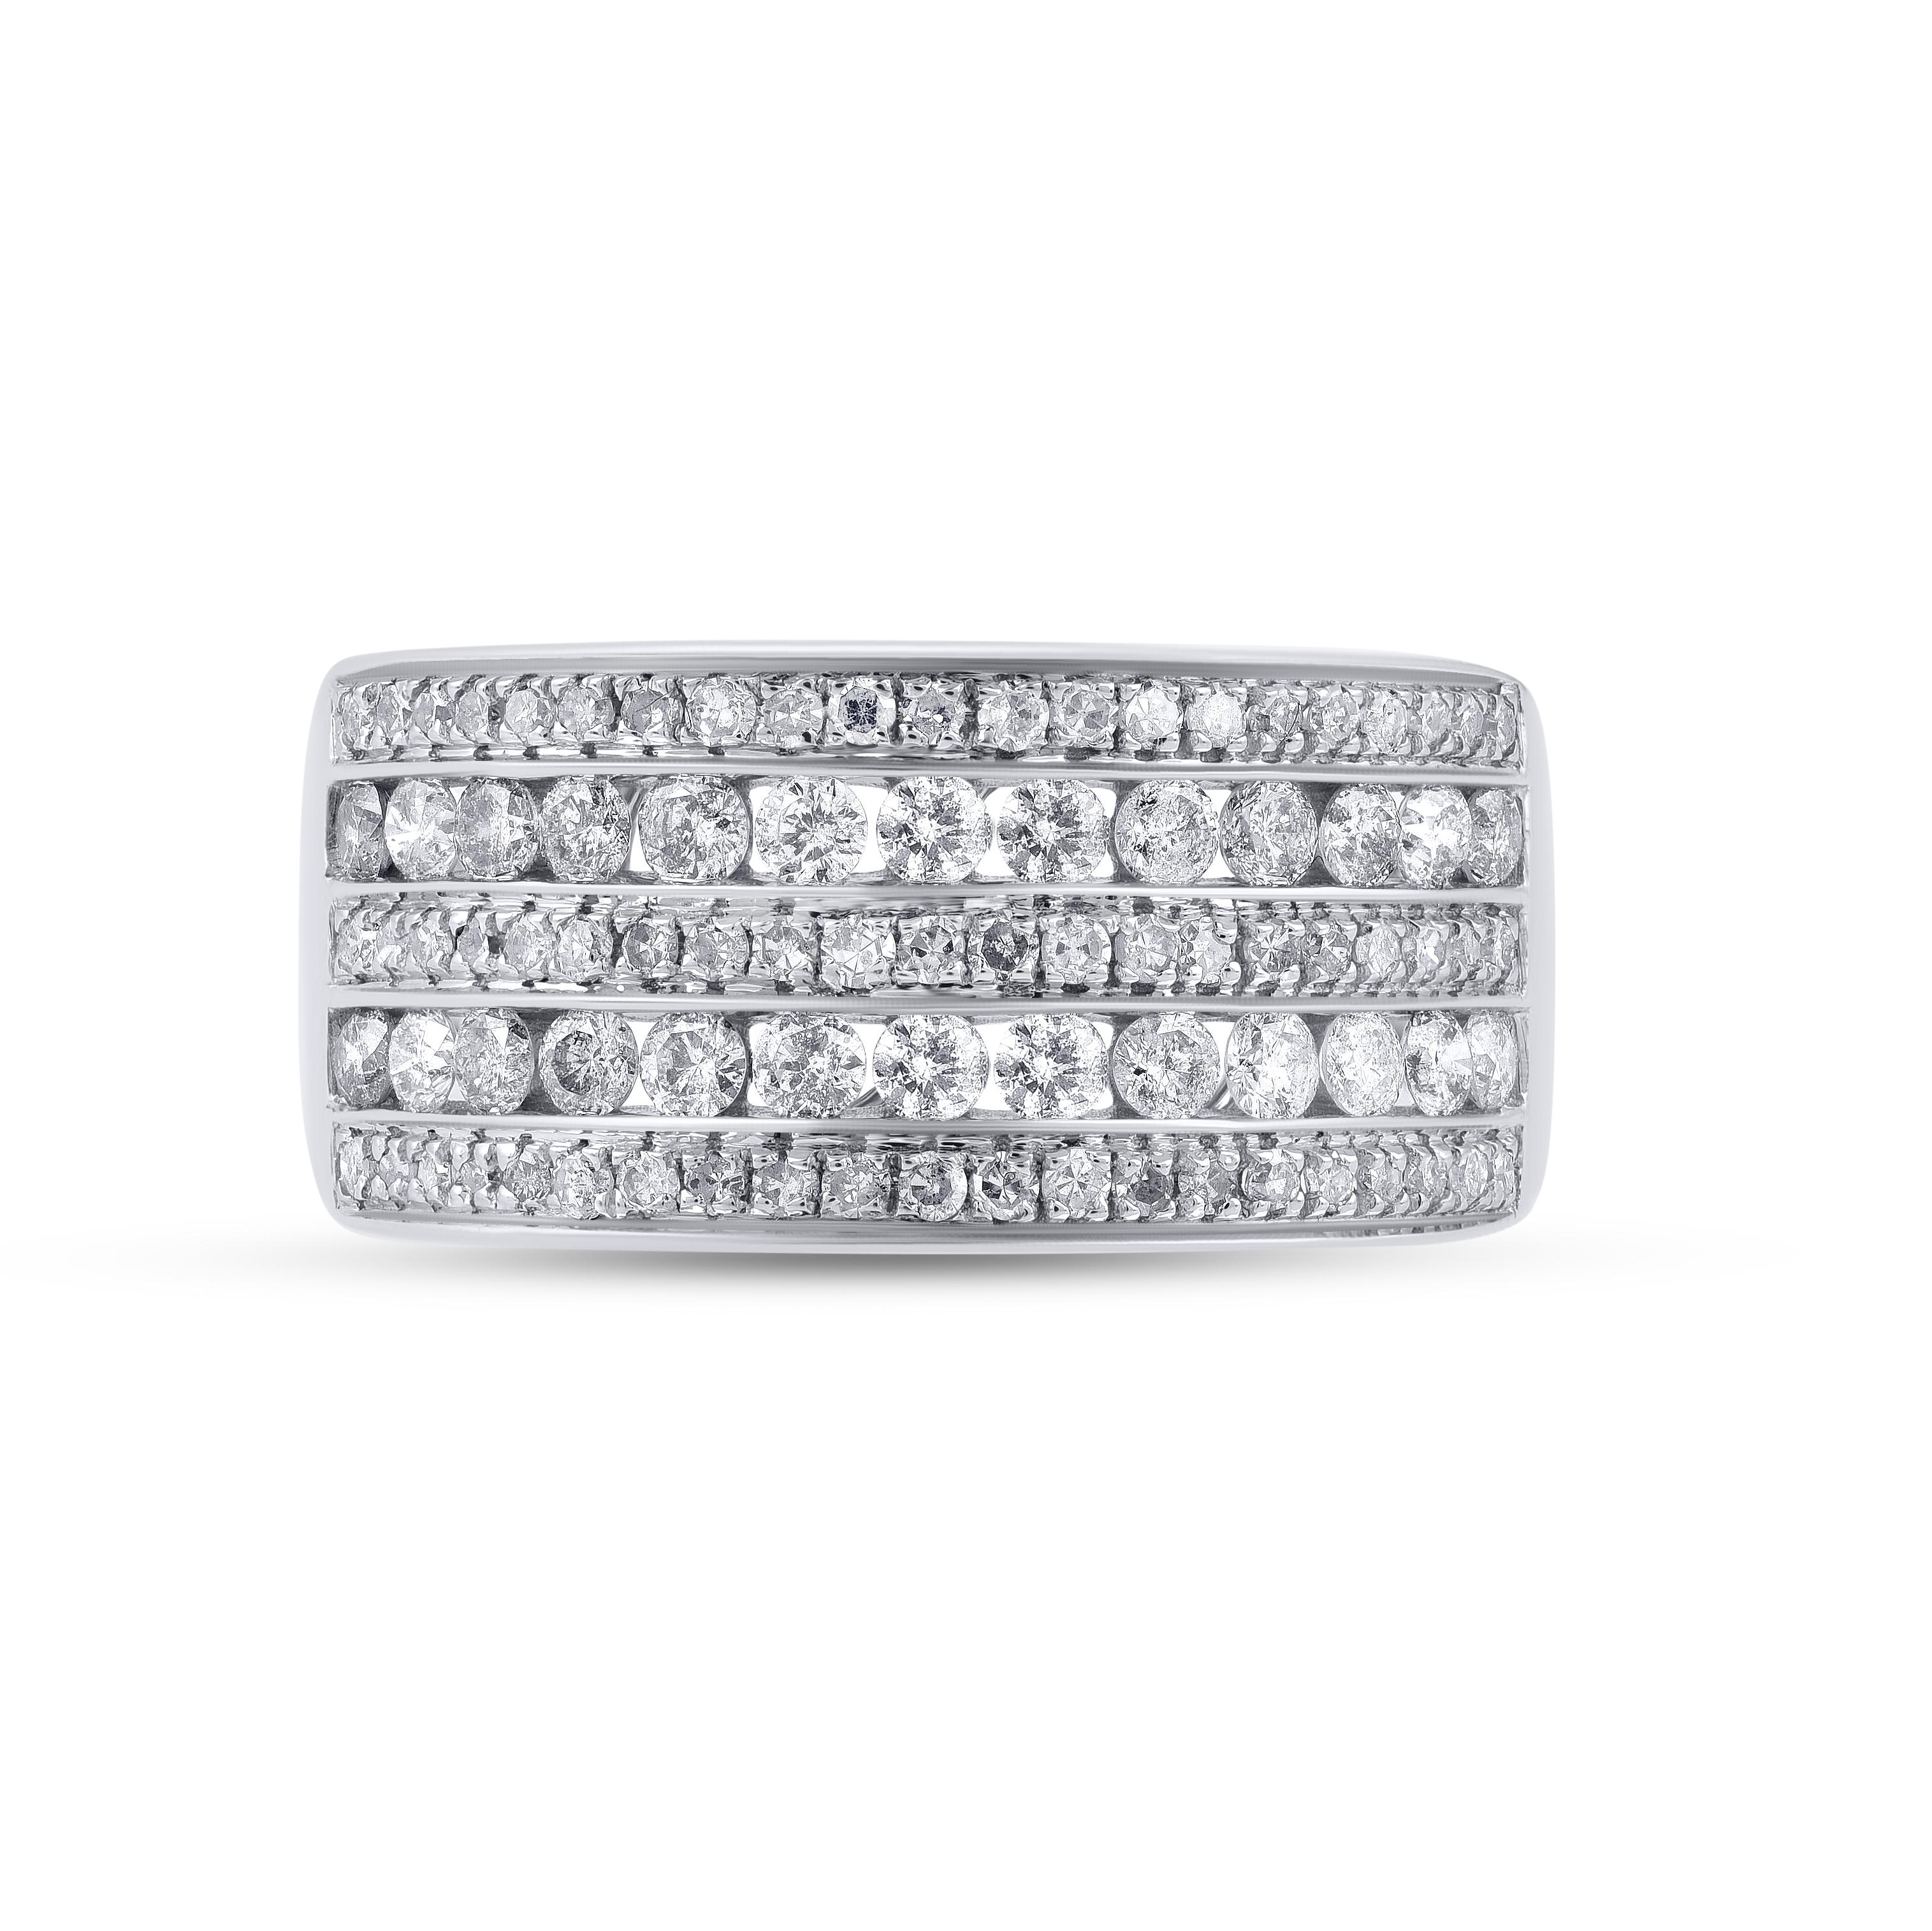 Honor your special day with this exceptional diamond band ring. This band ring features a sparkling 89 brilliant cut round diamonds beautifully set in prong and channel setting. The total diamond weight is 1.0 Carat. The diamonds are graded as H-I